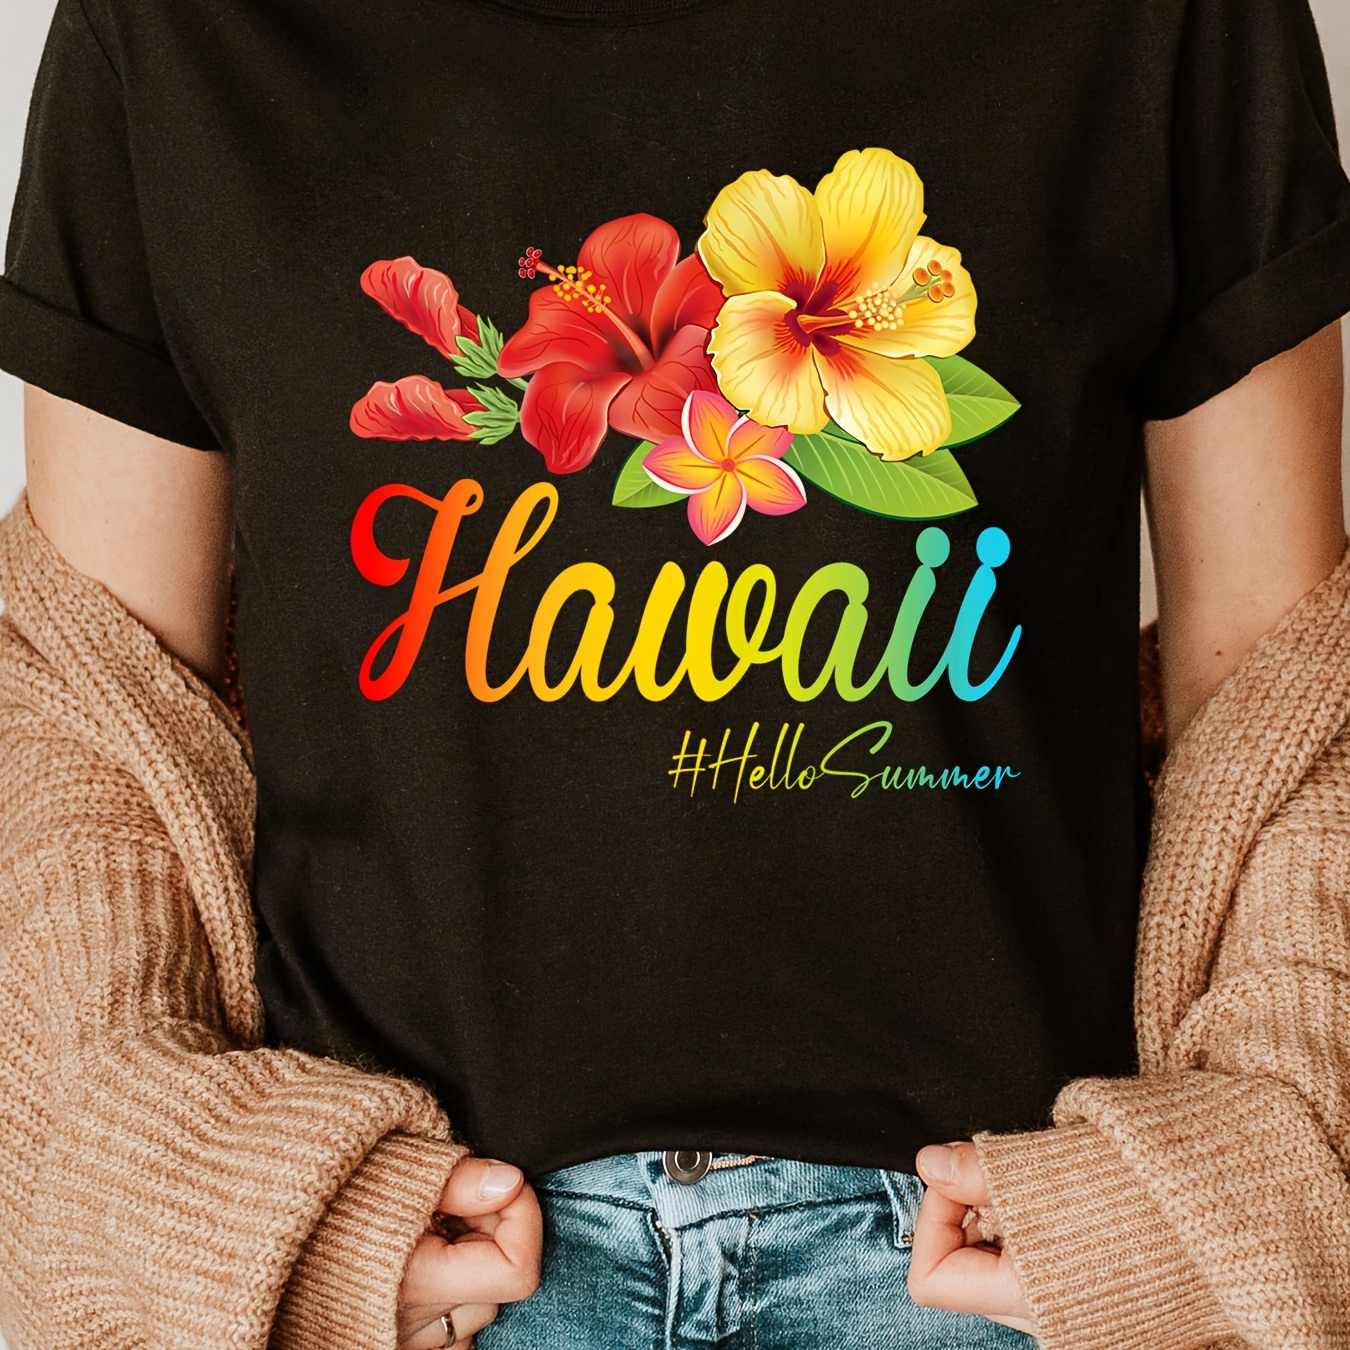 

Hawaii Floral Print Crew Neck T-shirt, Short Sleeve Casual Top For Summer & Spring, Women's Clothing